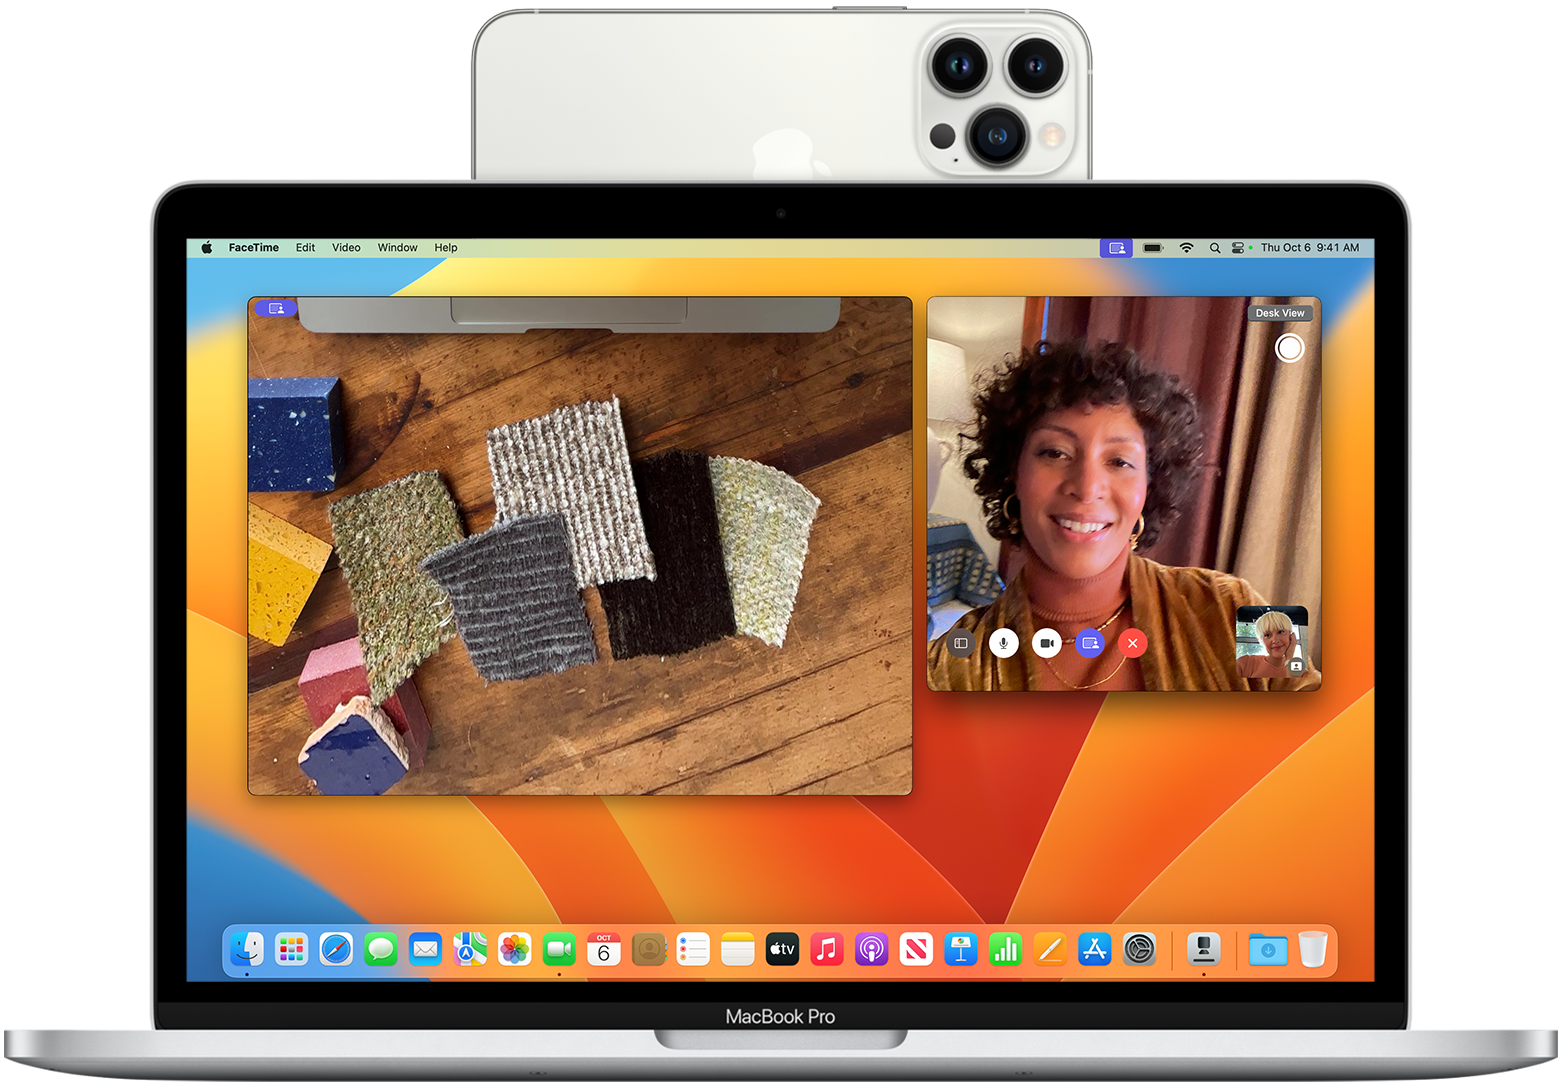 Using an iPhone as a webcam using Continuity Camera for macOS.